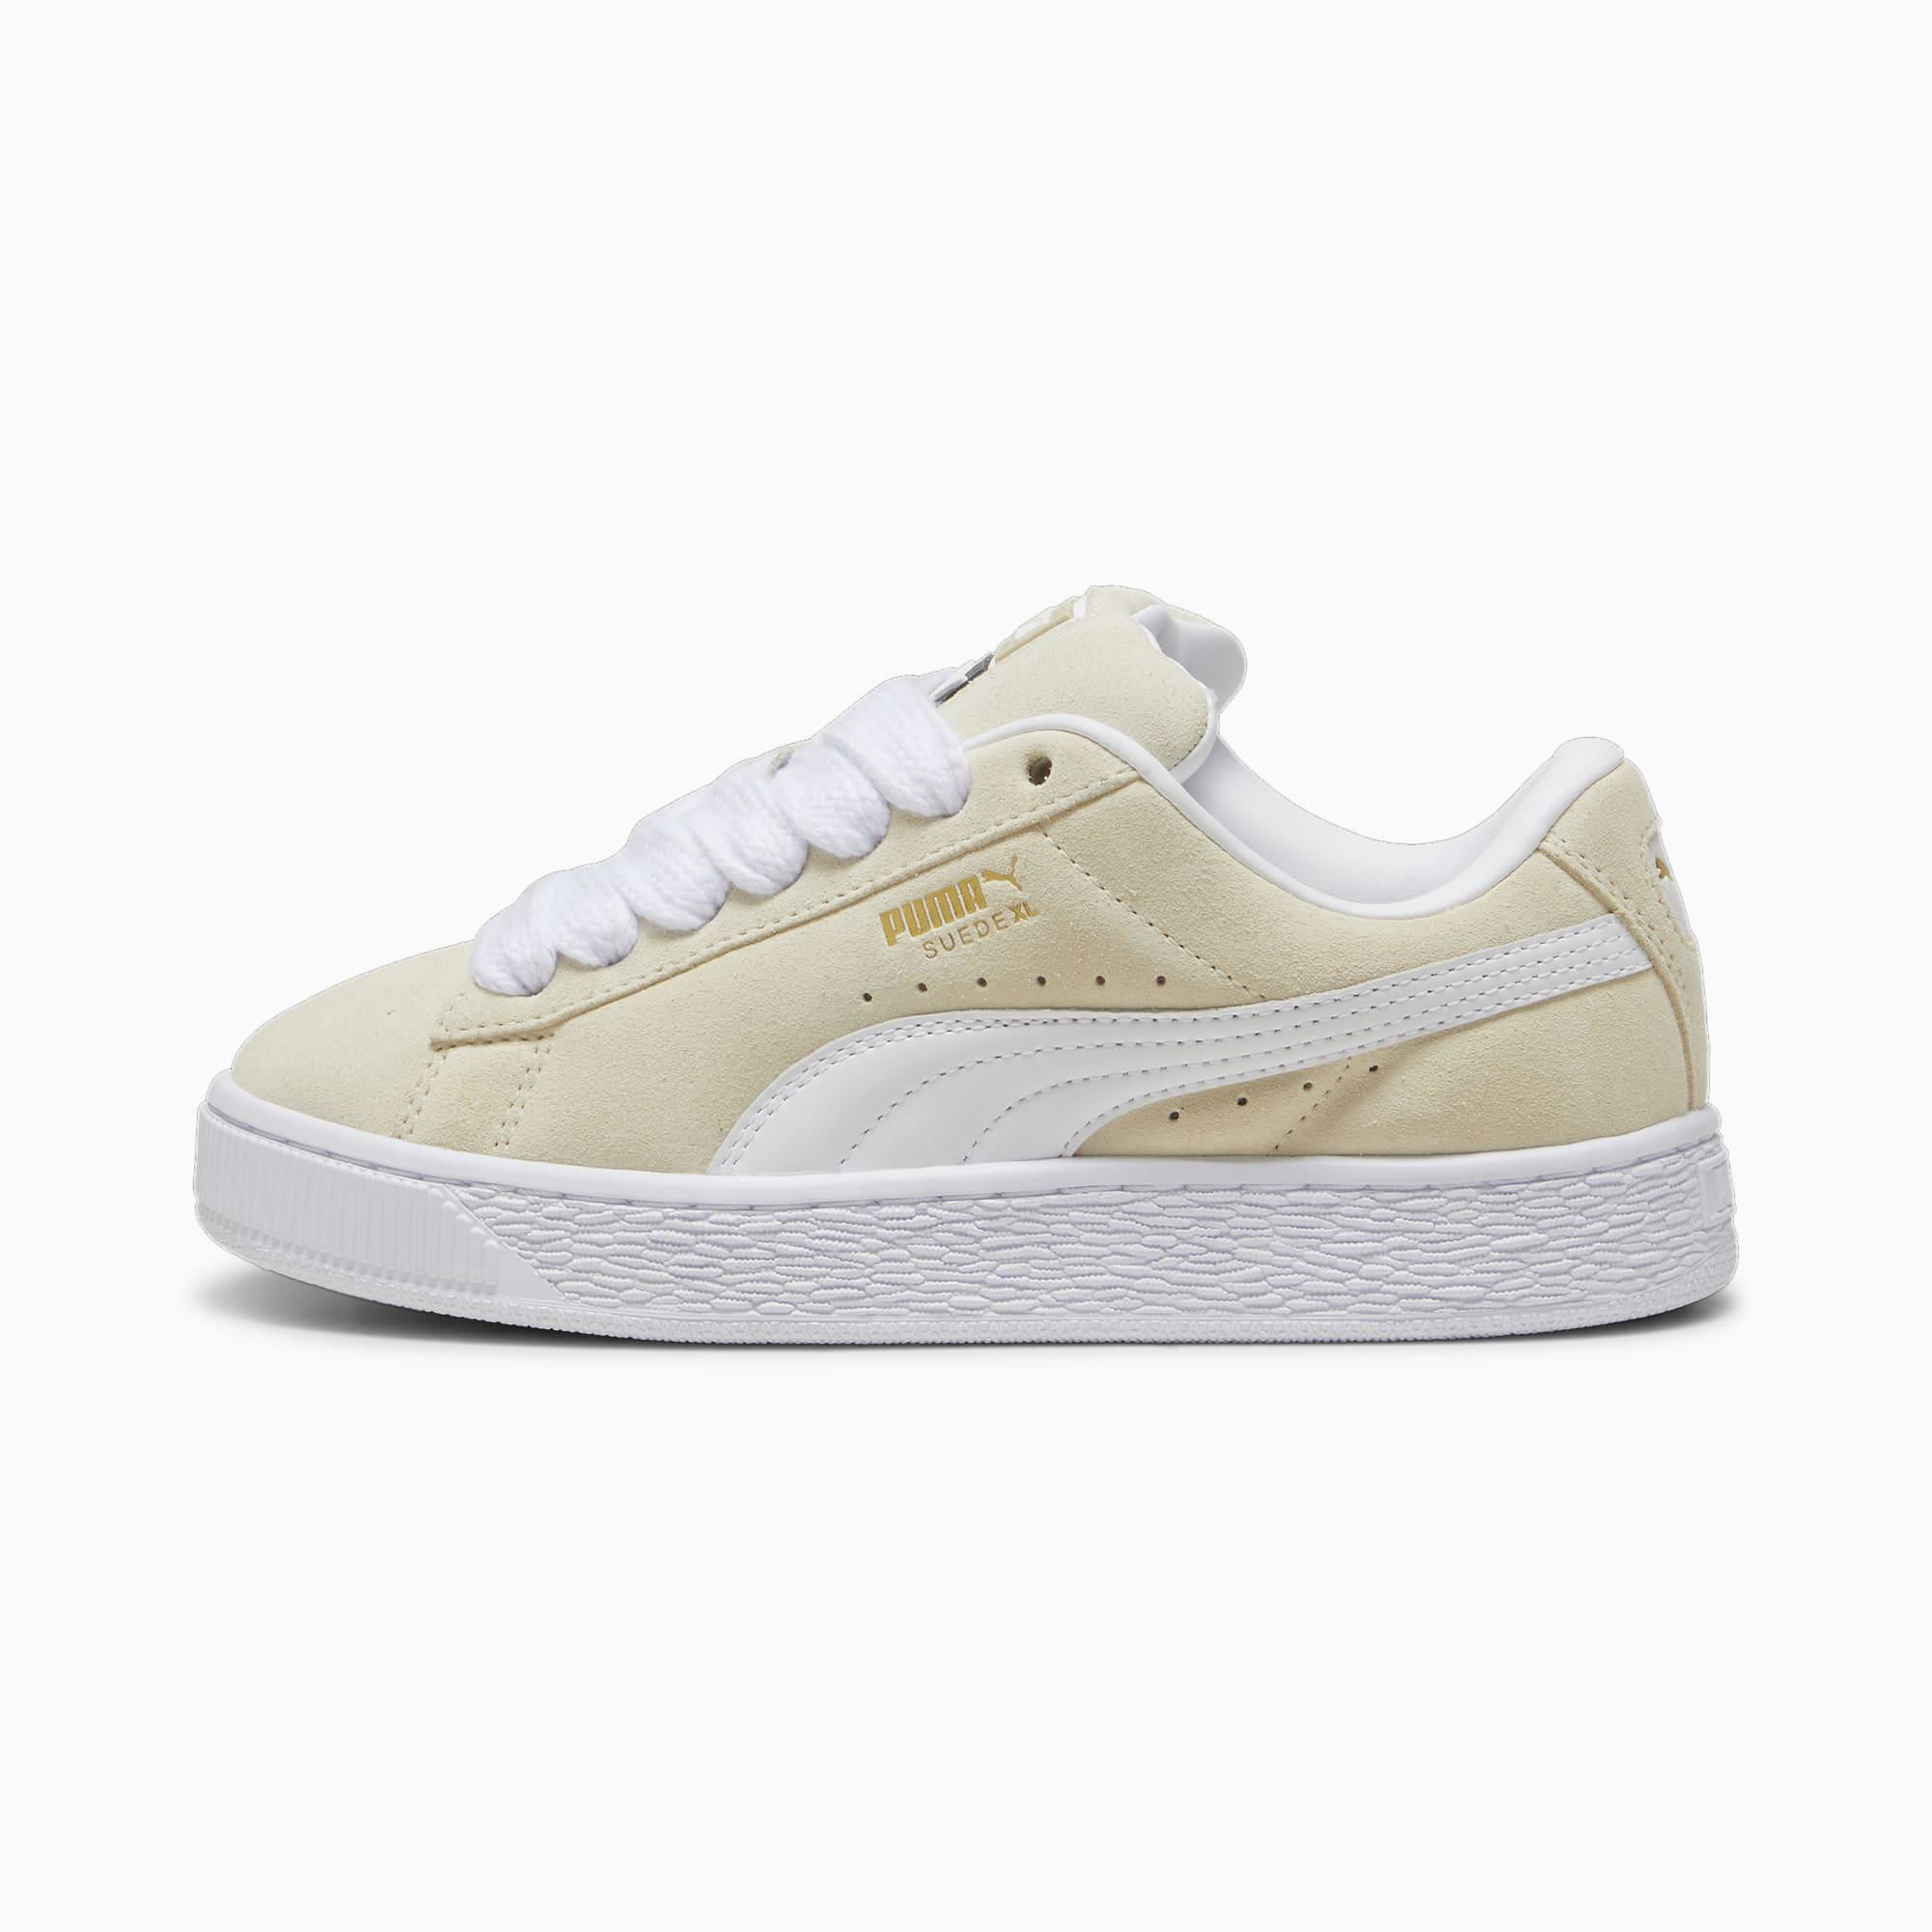 Suede XL Men's Sneakers by PUMA